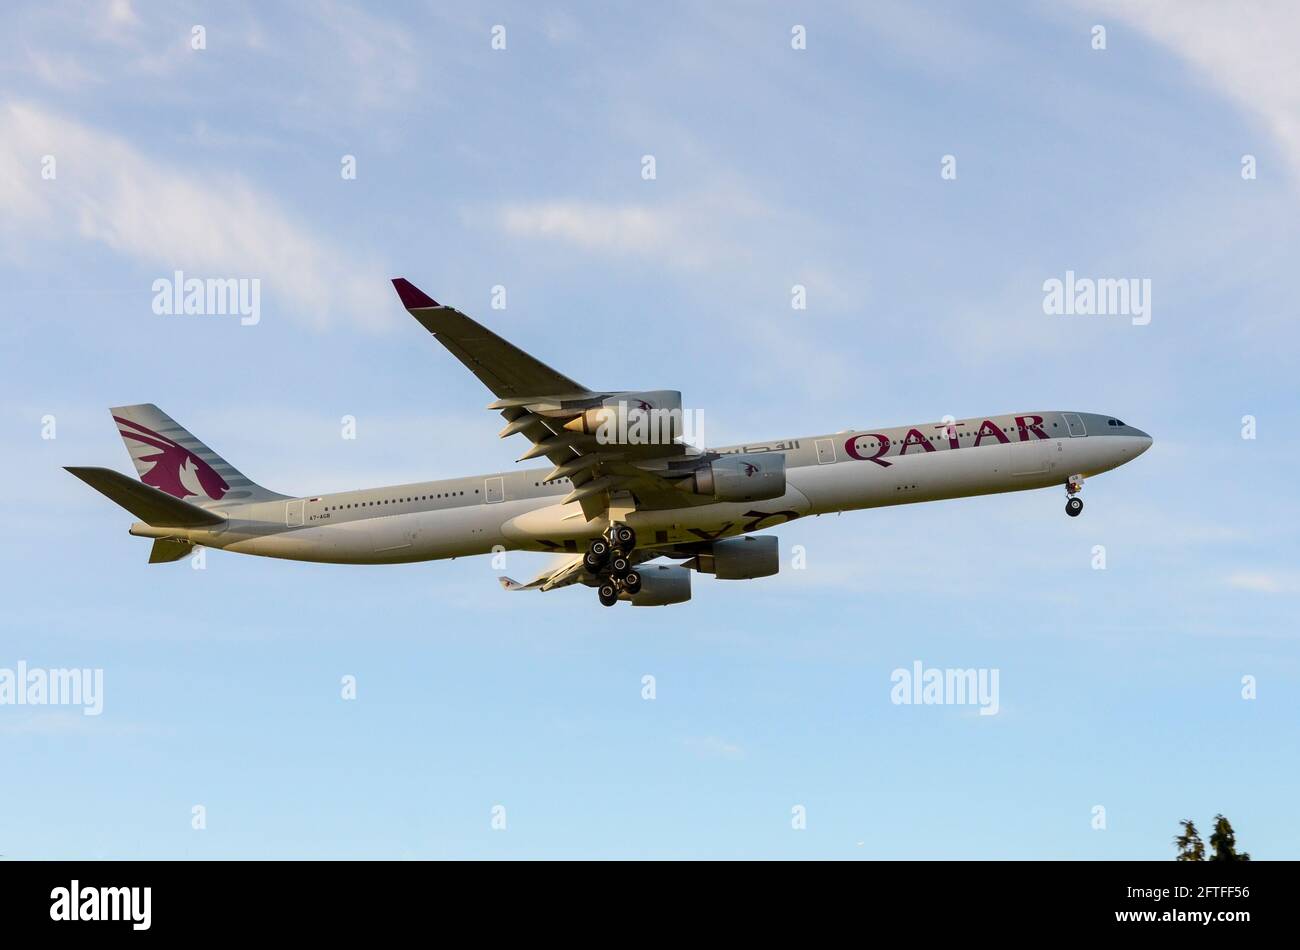 Qatar Airways Airbus A340 airliner jet plane A7-AGB landing at London Heathrow Airport, UK, in blue sky. Arrival in early evening Stock Photo